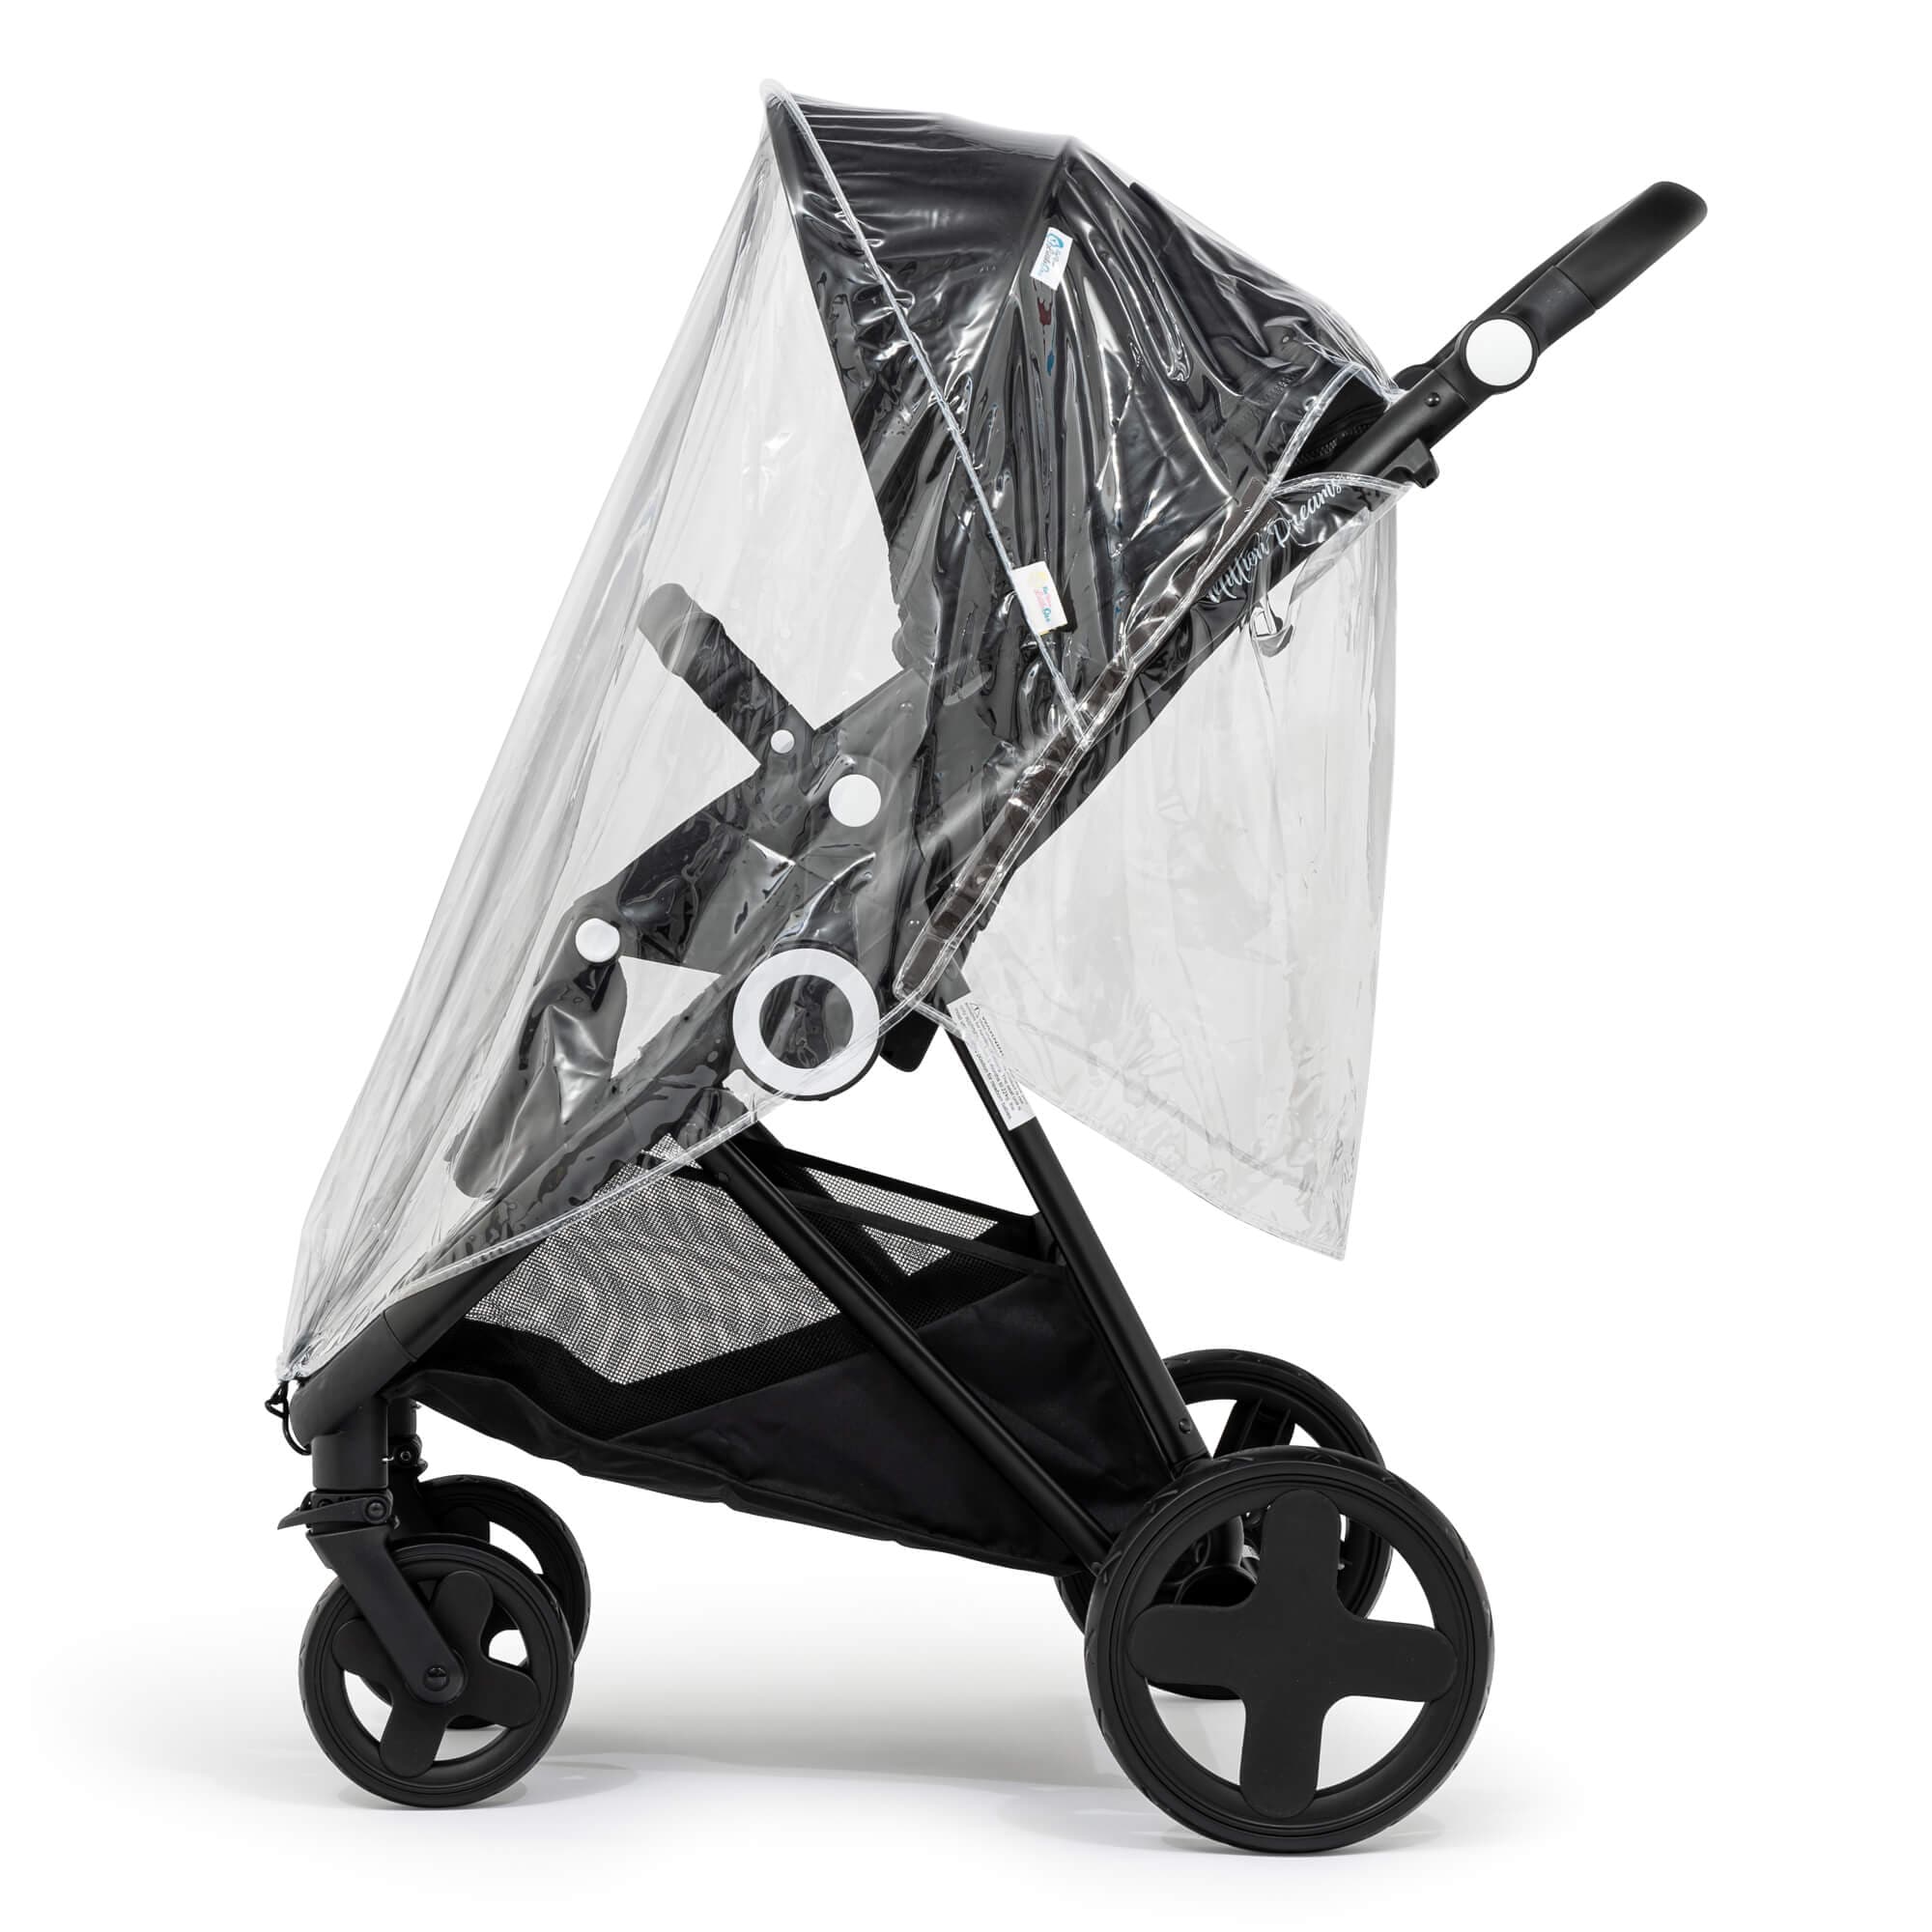 Pushchair Raincover Compatible With Brio - For Your Little One